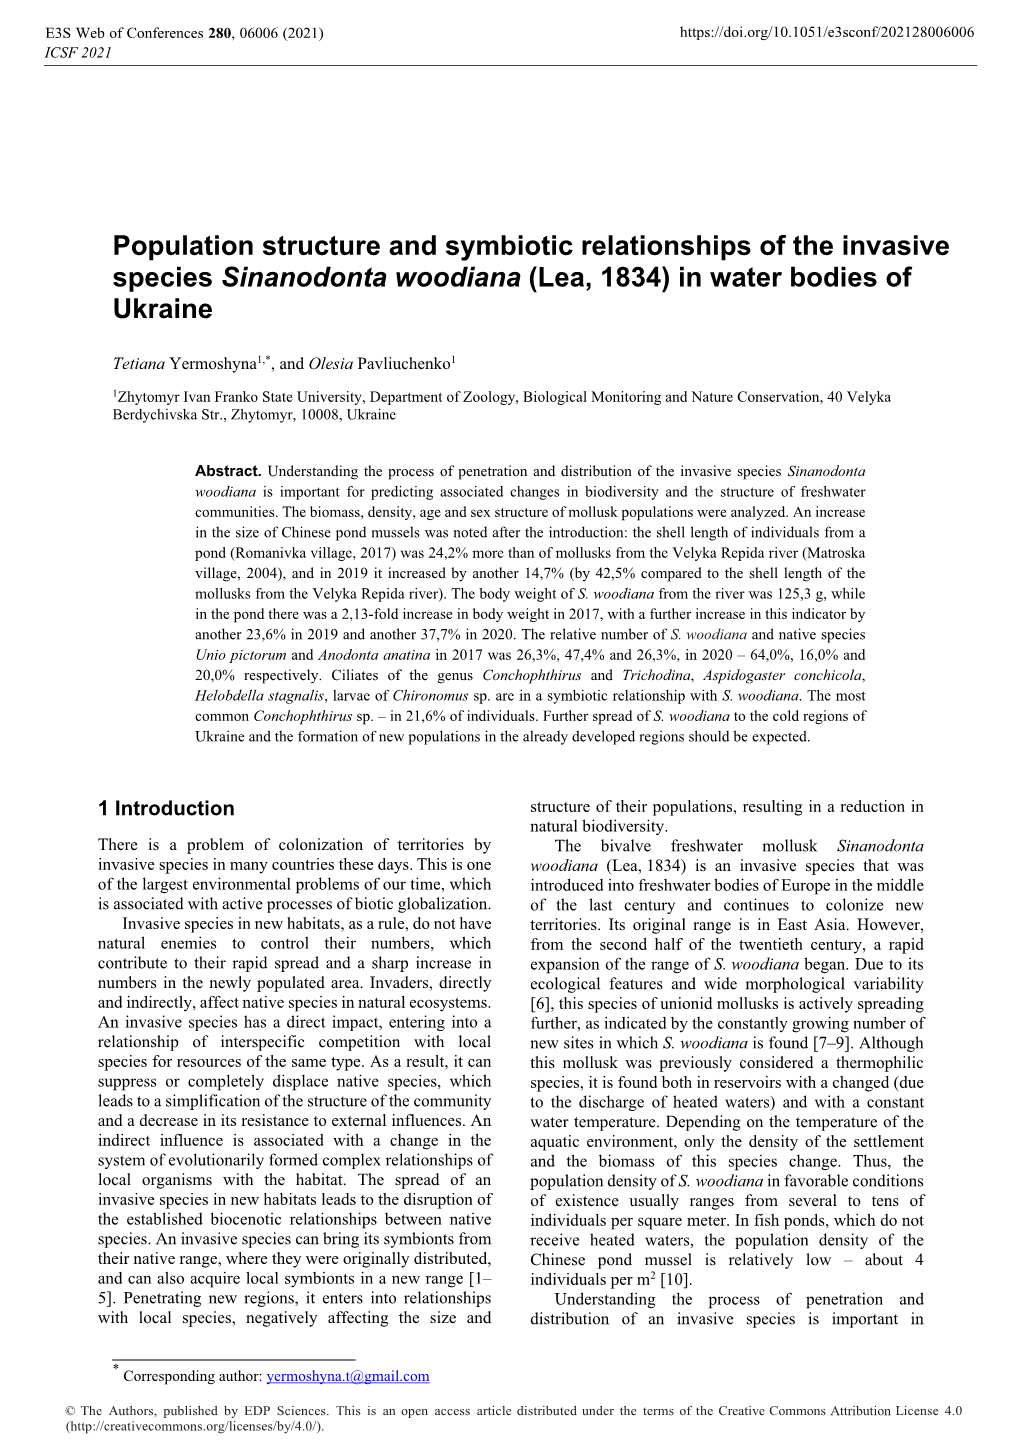 Population Structure and Symbiotic Relationships of the Invasive Species Sinanodonta Woodiana (Lea, 1834) in Water Bodies of Ukraine